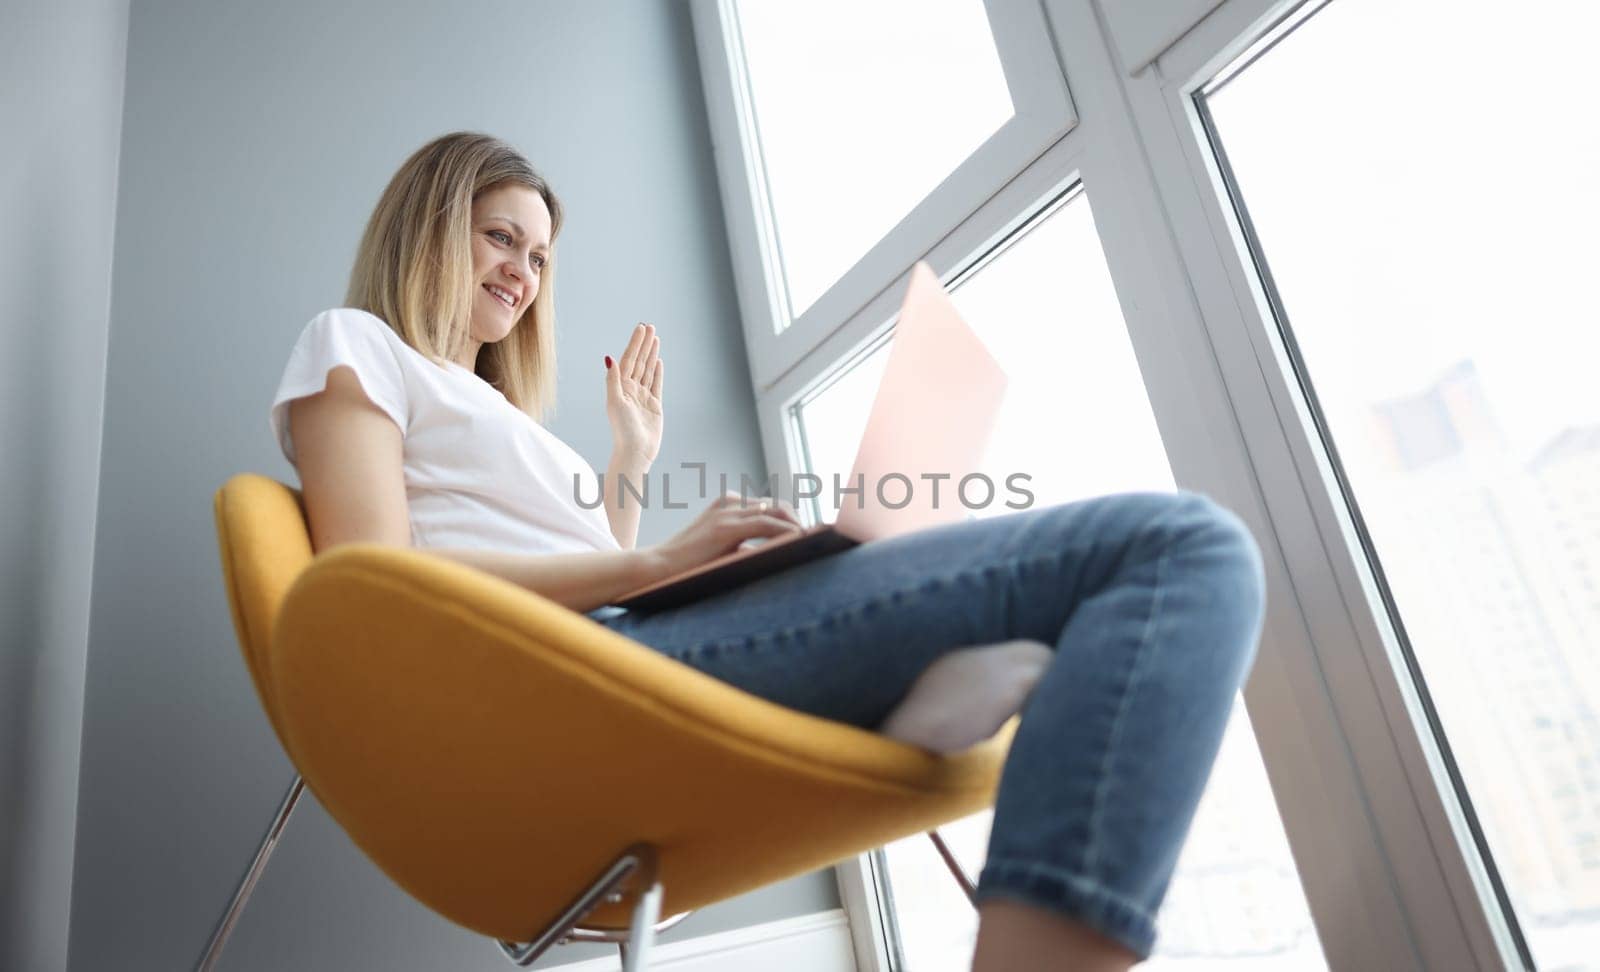 Woman waving hand at laptop screen at home. Self isolation during covid19 pandemic concept